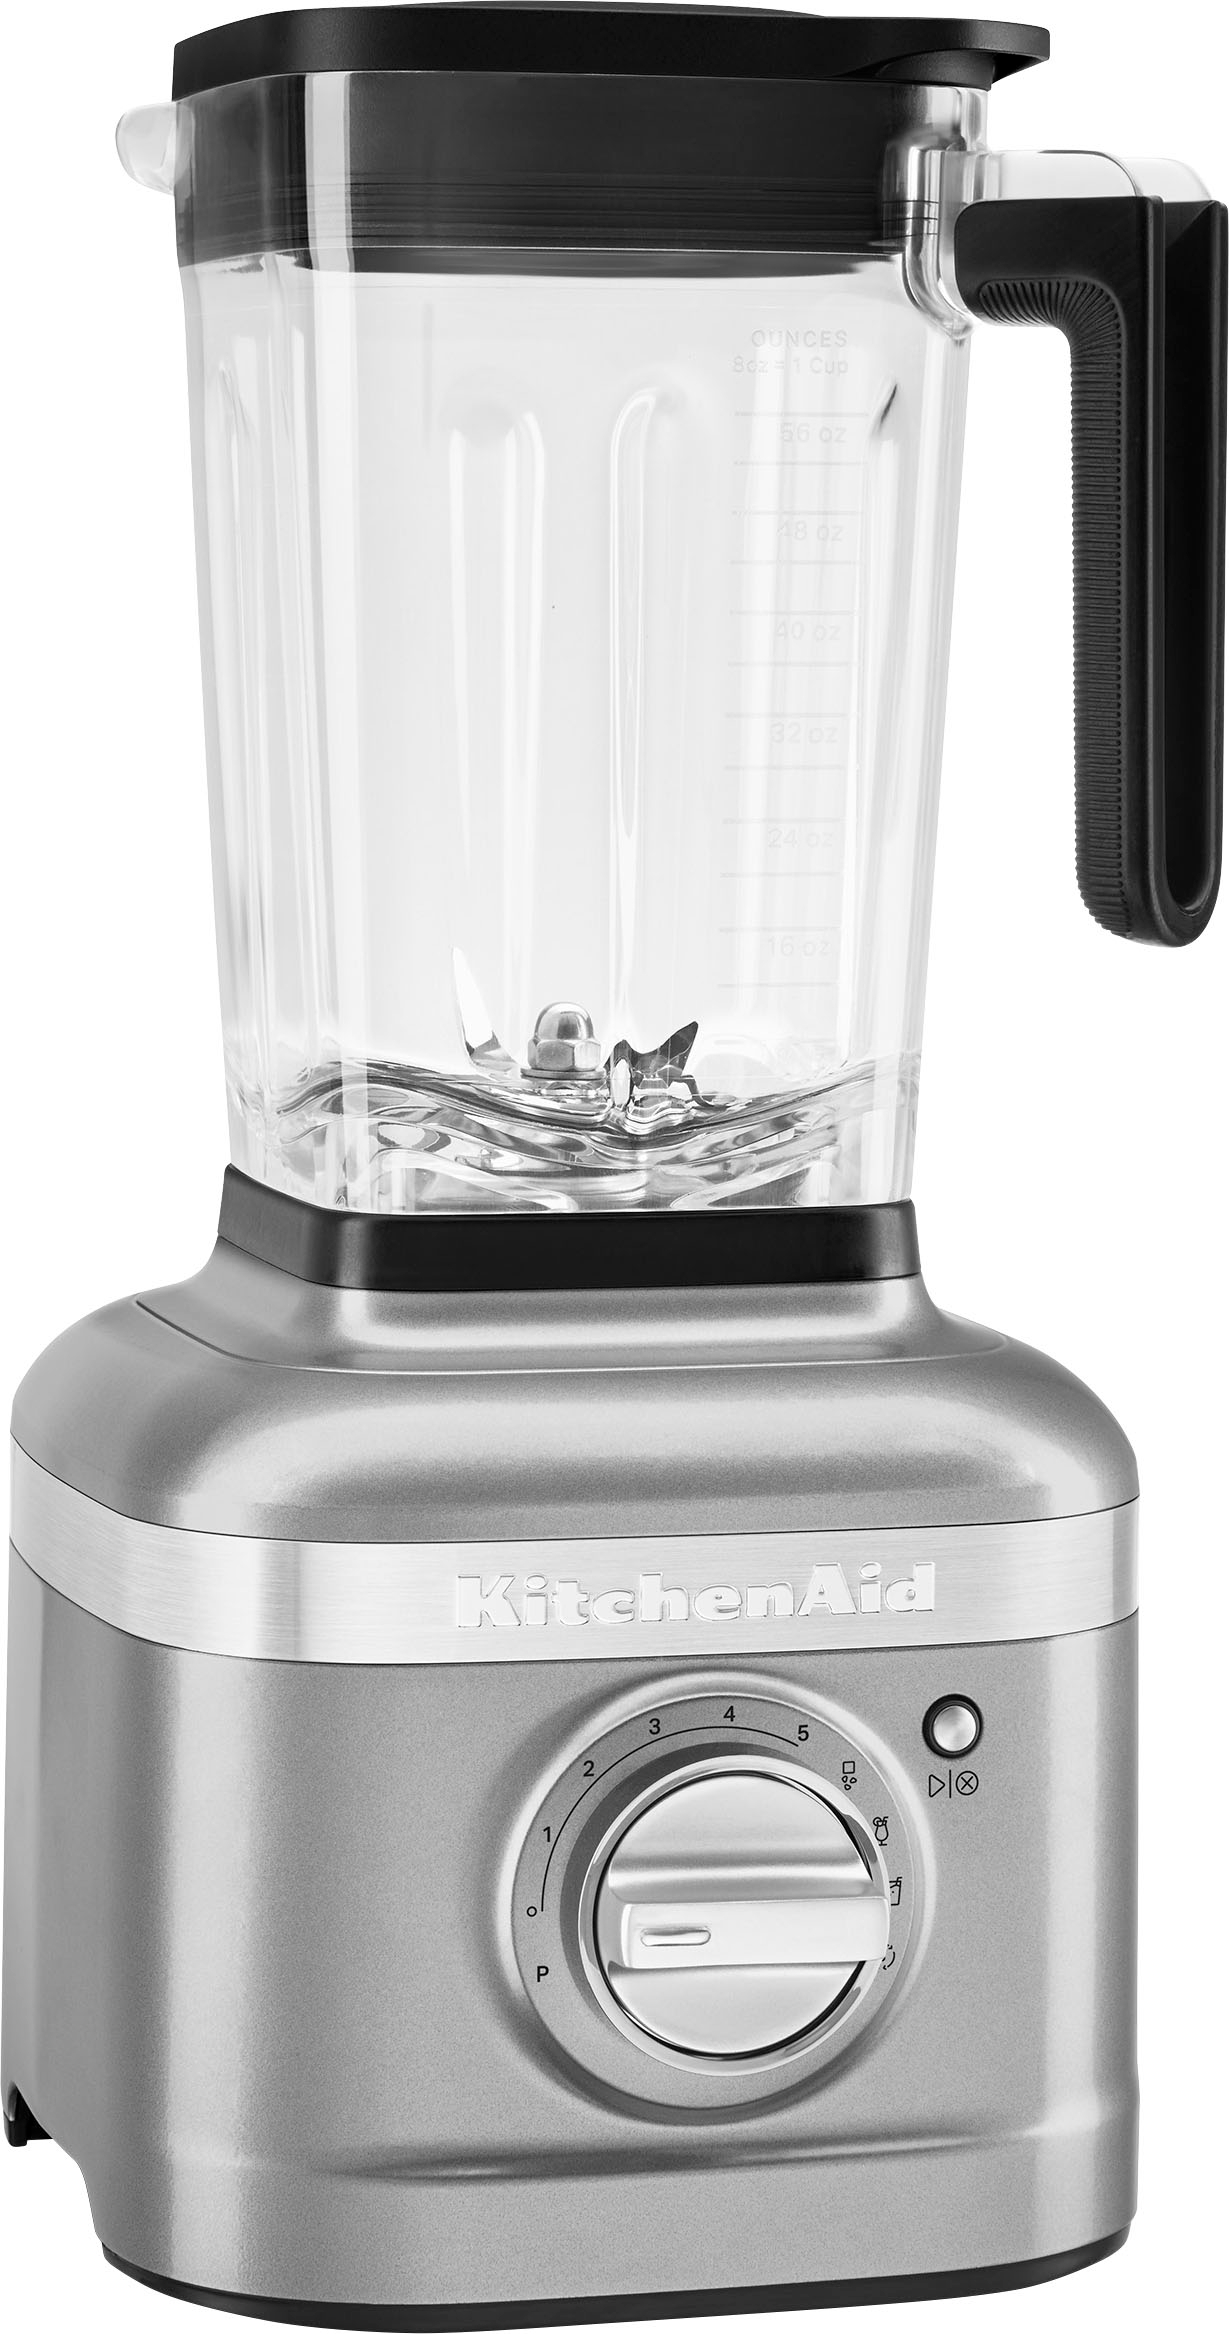 How To: Get Started using the KitchenAid K400 Blender